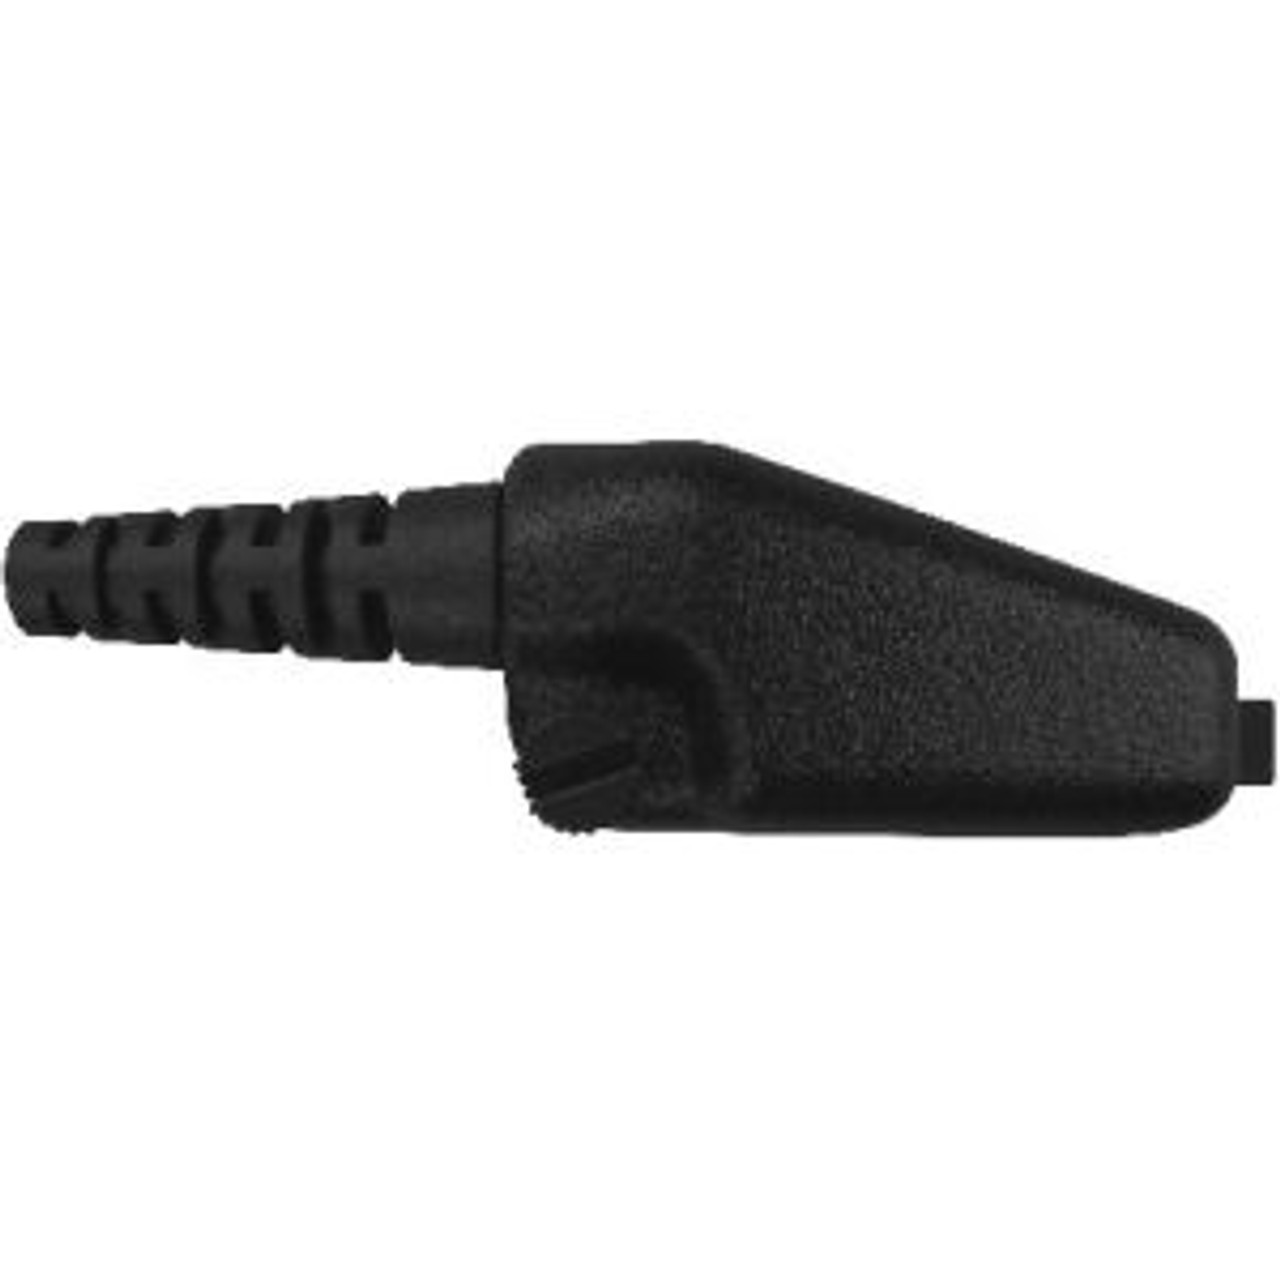 Otto ClearTrak NRX Behind The Head Double Muff Headset For Kenwood TK-5320